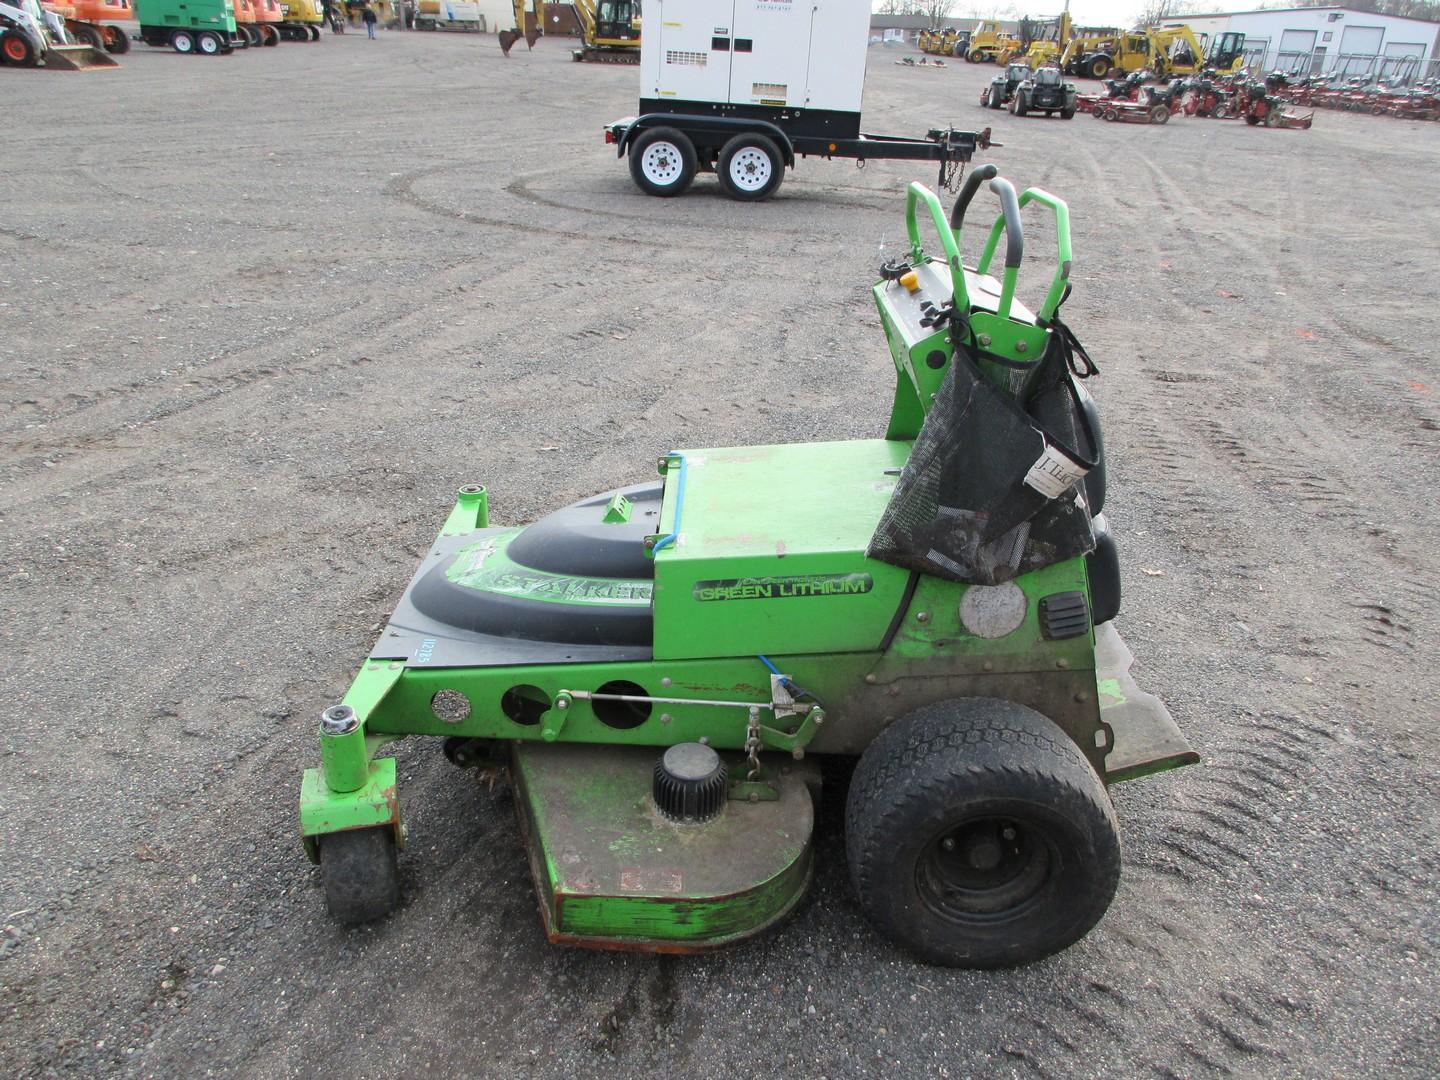 Mean Green 48" Electric Stander Mower